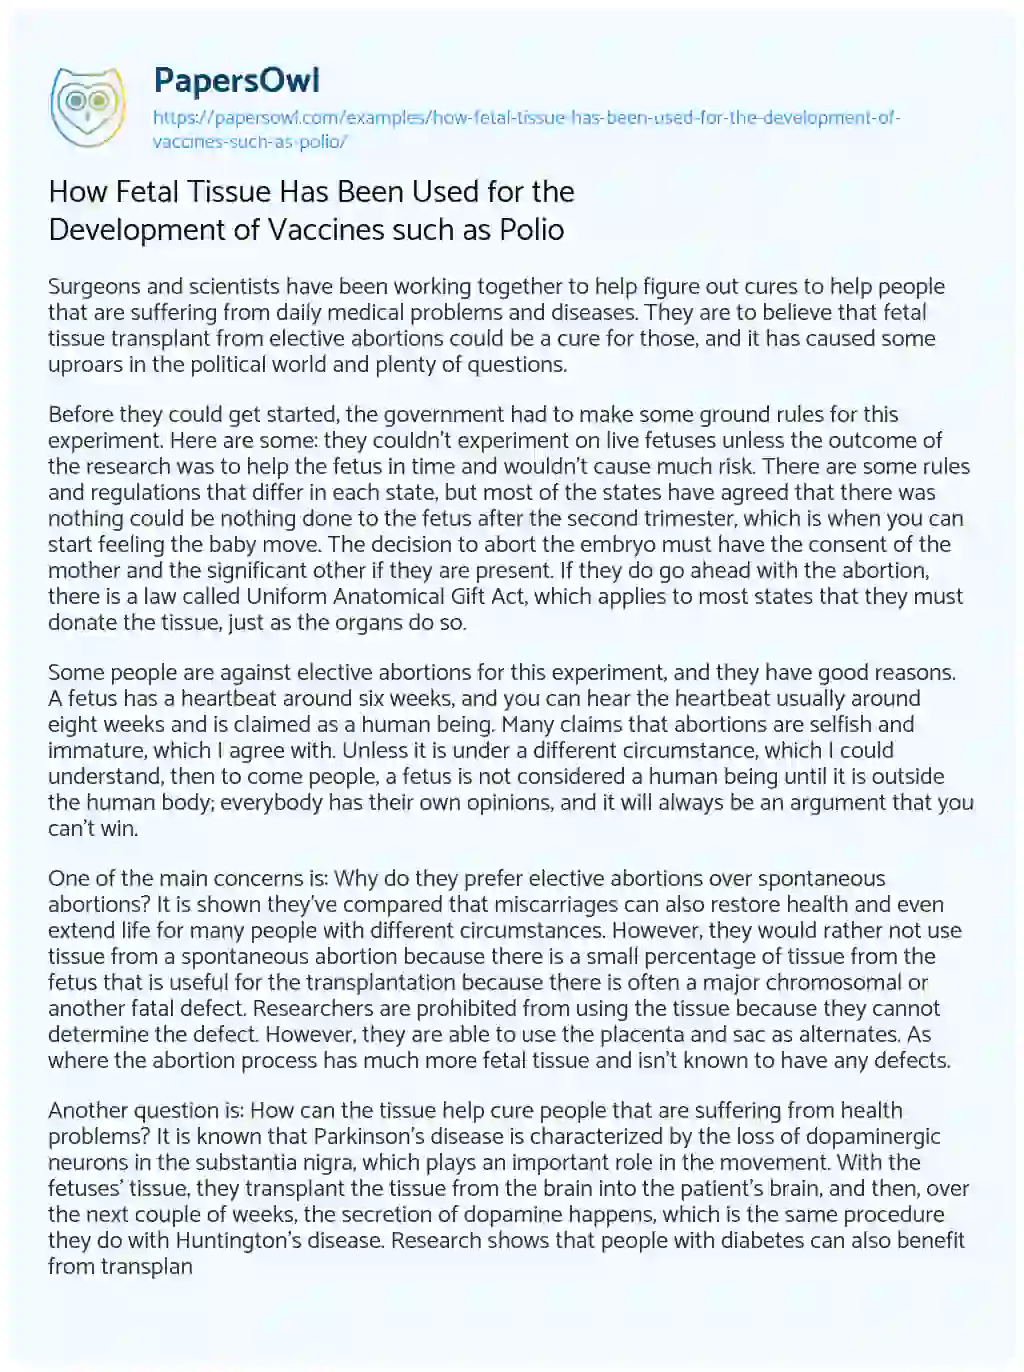 Essay on How Fetal Tissue has been Used for the Development of Vaccines such as Polio